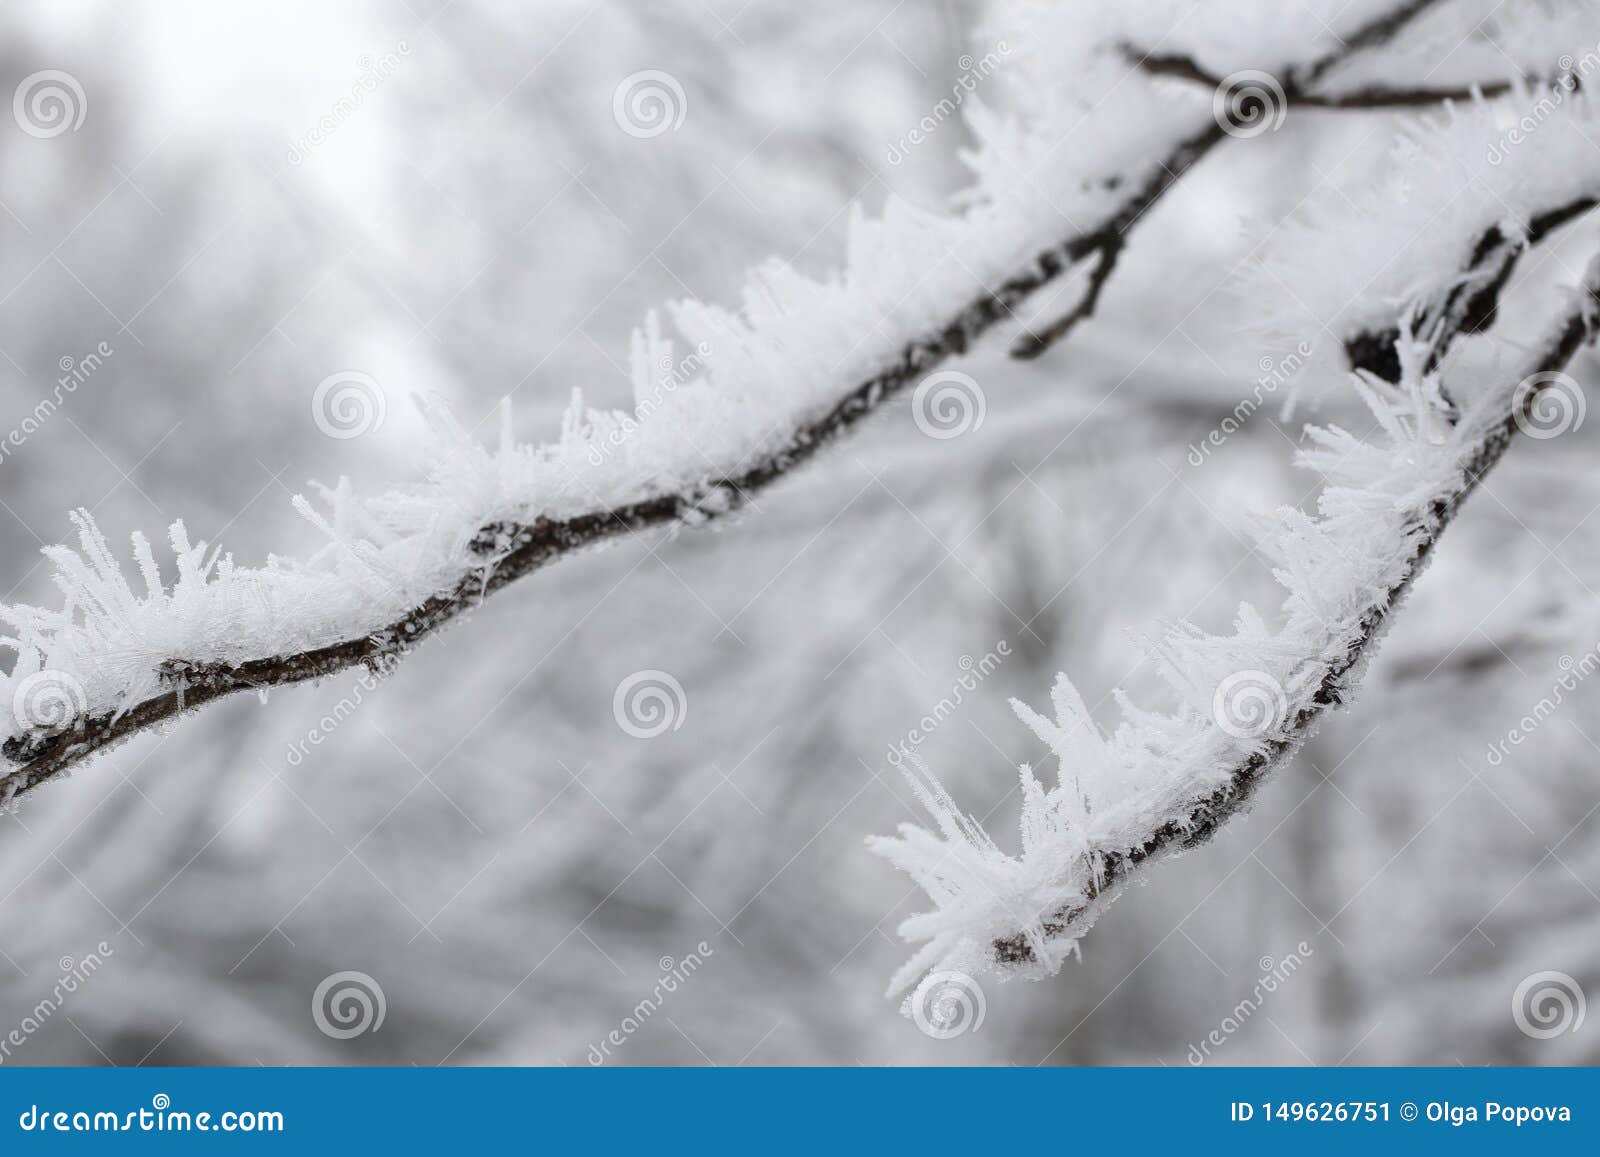 Frozen Ice Crystals on the Branches Stock Image - Image of back, frozen ...